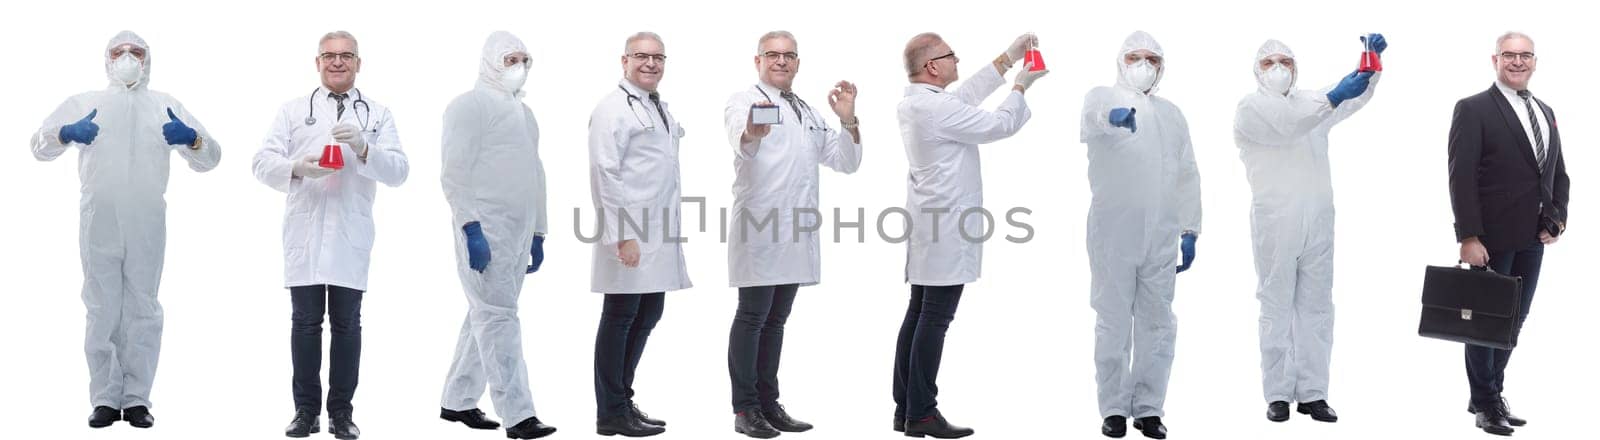 set of images of a man in full growth. displays many concepts